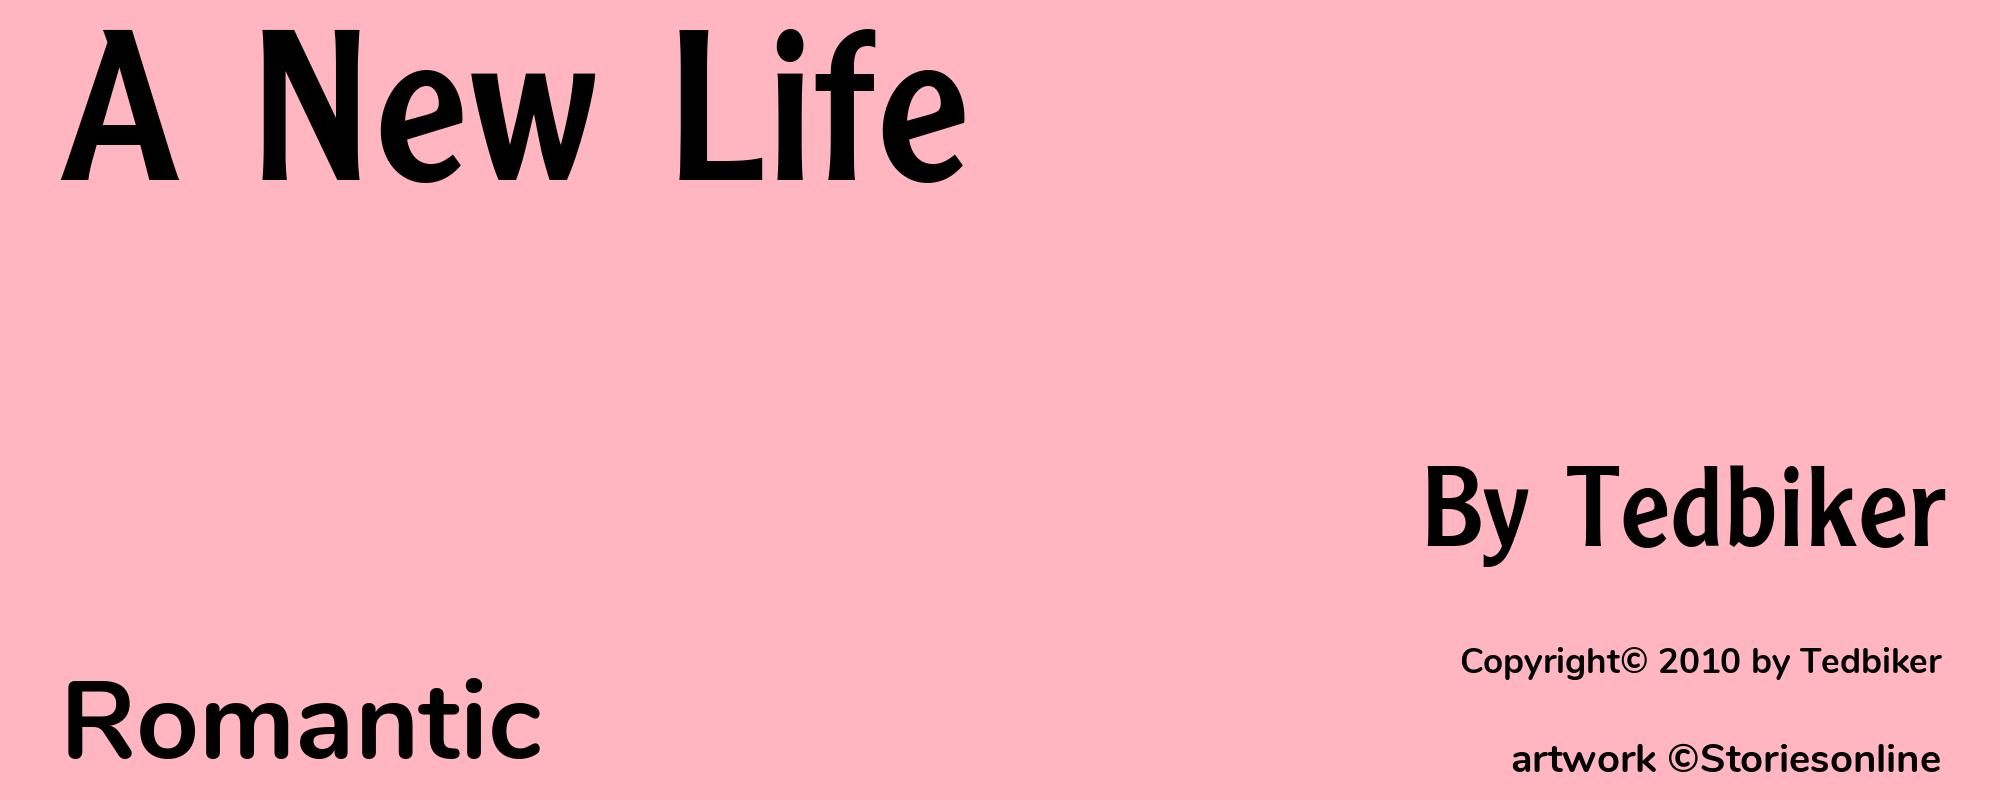 A New Life - Cover